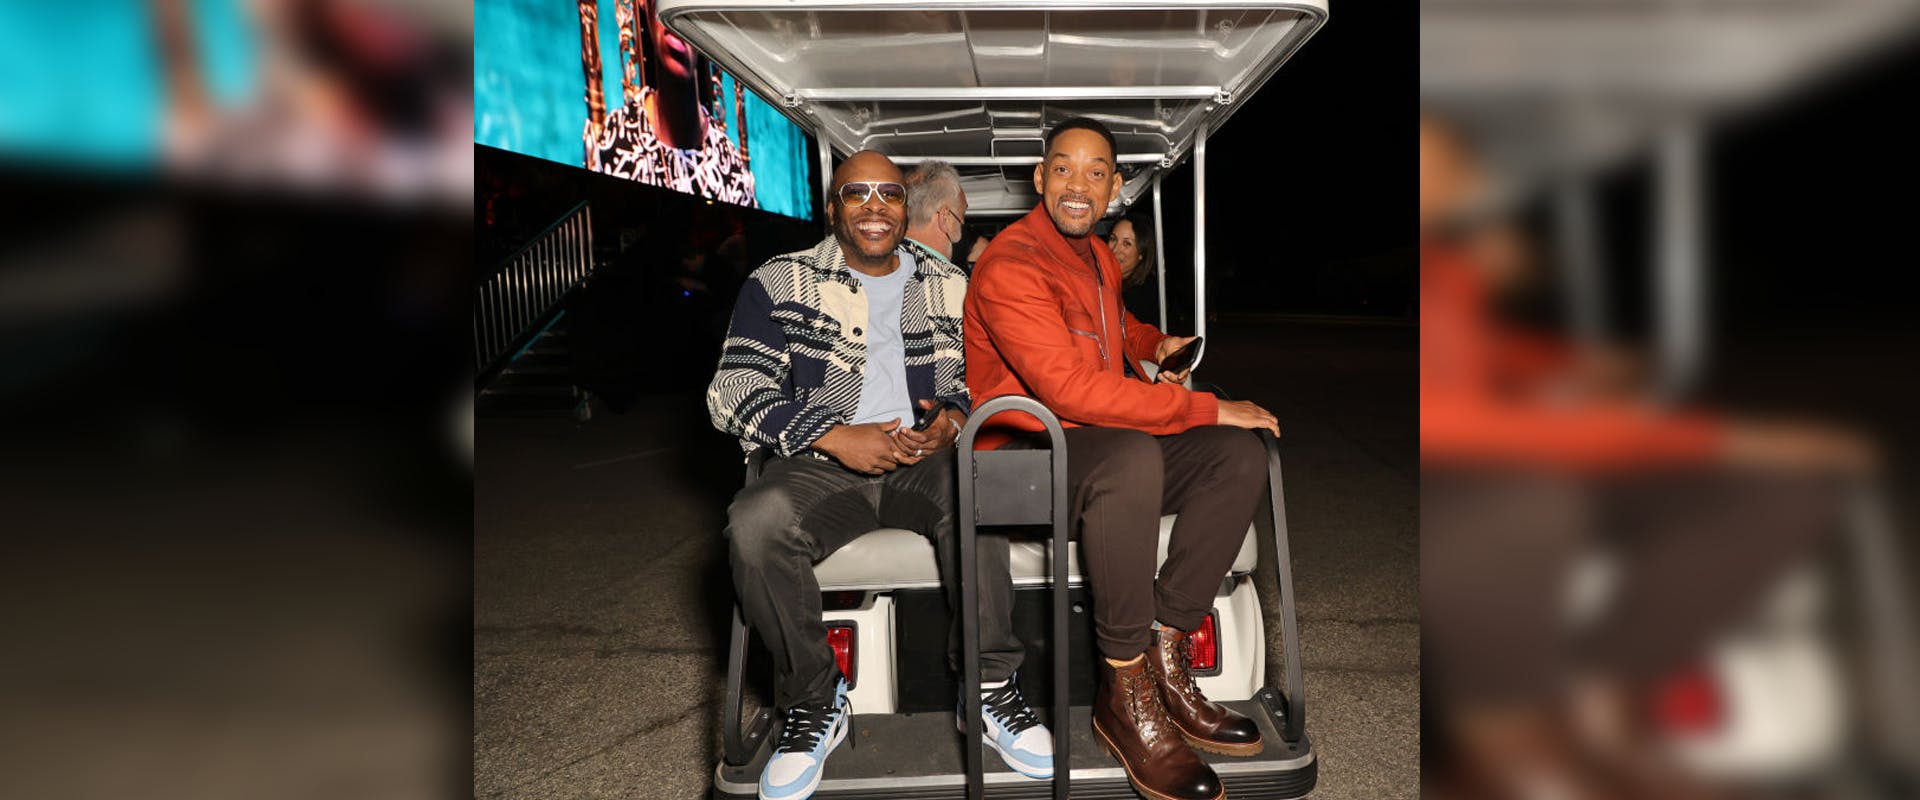 Peacock's New Drama Series "Bel-Air" Los Angeles Drive-Into Experience & Pull-up Premiere Screening
SANTA MONICA, CALIFORNIA - FEBRUARY 09: (L-R) DJ Jazzy Jeff and Will Smith attend Peacock's new drama series "Bel-Air" Los Angeles Drive-Into Experience & Pull-up Premiere Screening at Barker Hangar on February 09, 2022 in Santa Monica, California.